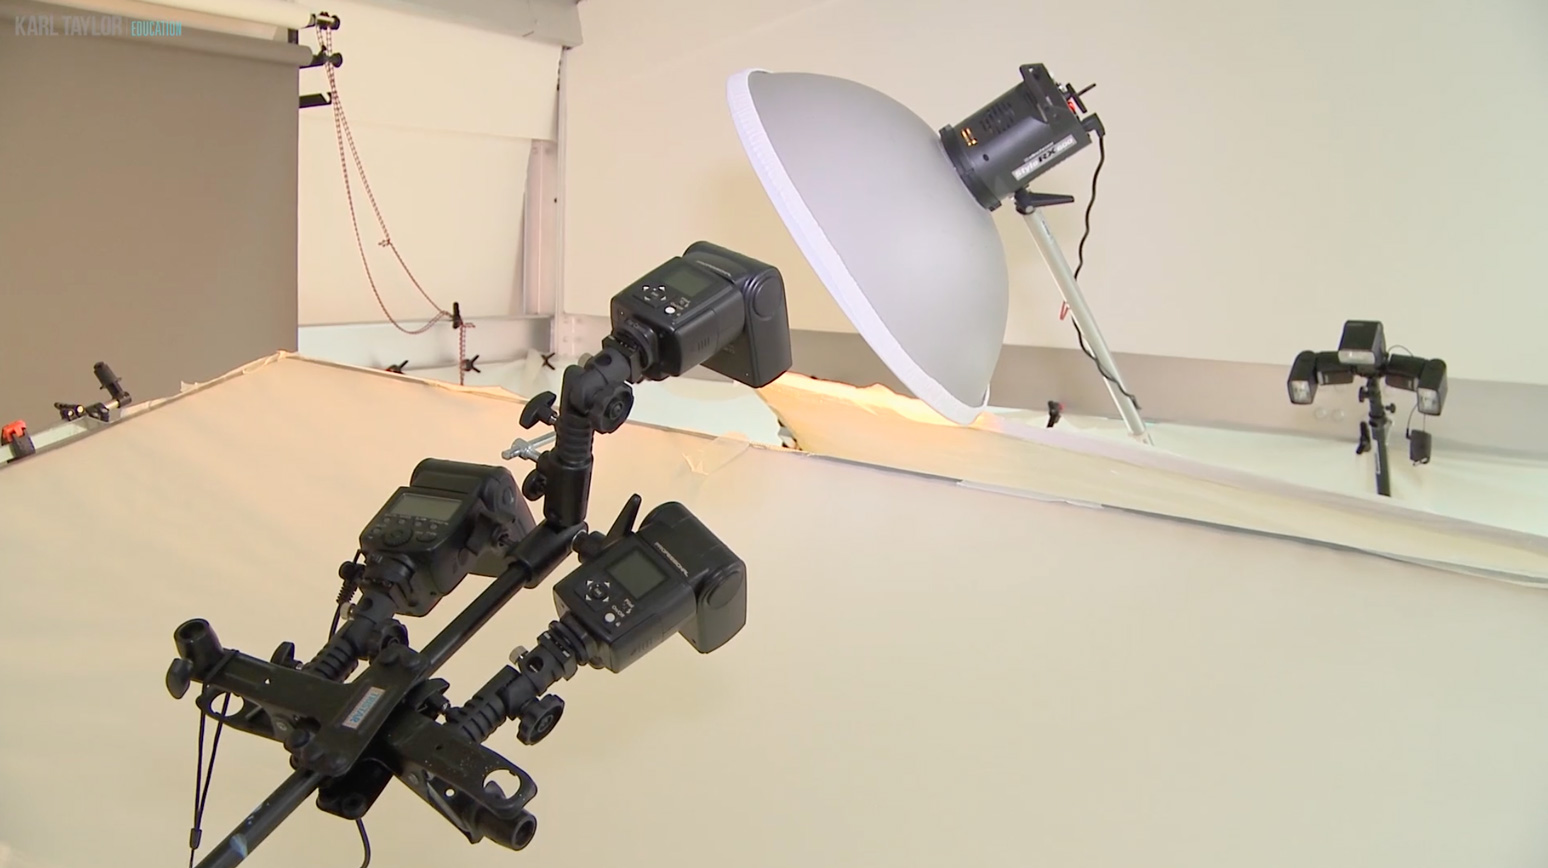 Speedlights used in conjunction with strobes